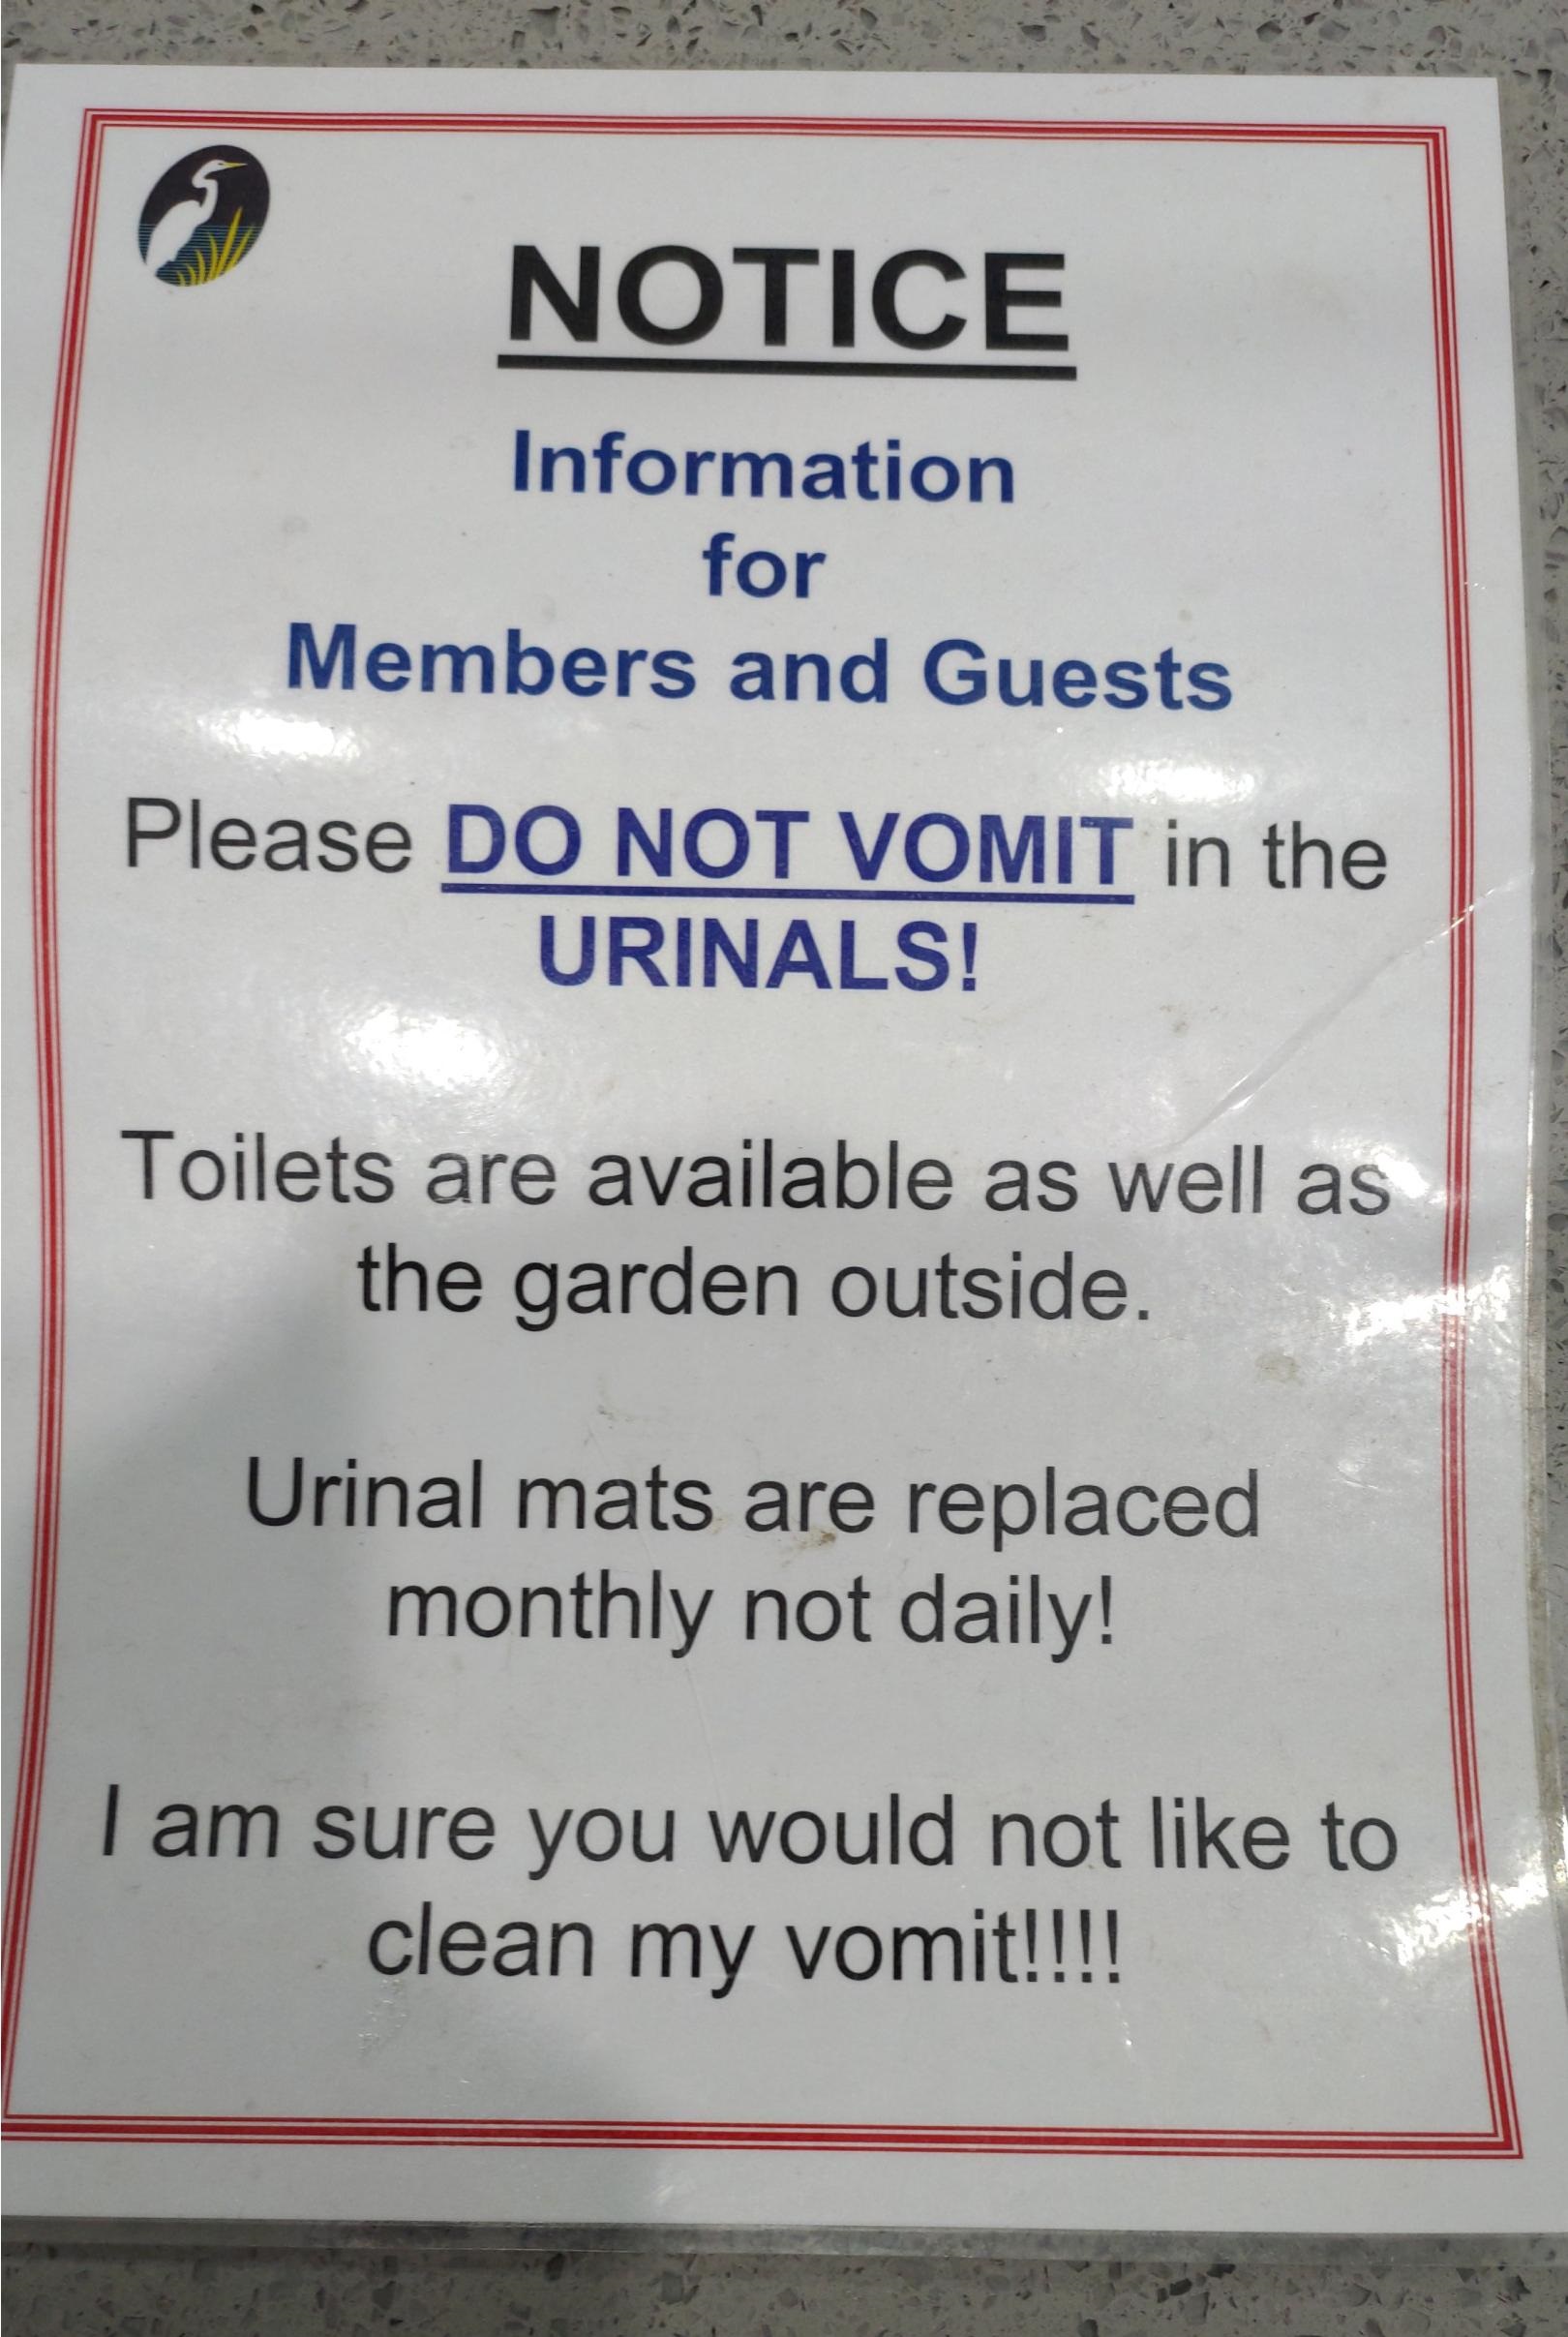 sign - Notice Information for Members and Guests Please Do Not Vomit in the Urinals! Toilets are available as well as the garden outside. Urinal mats are replaced monthly not daily! I am sure you would not to clean my vomit!!!!